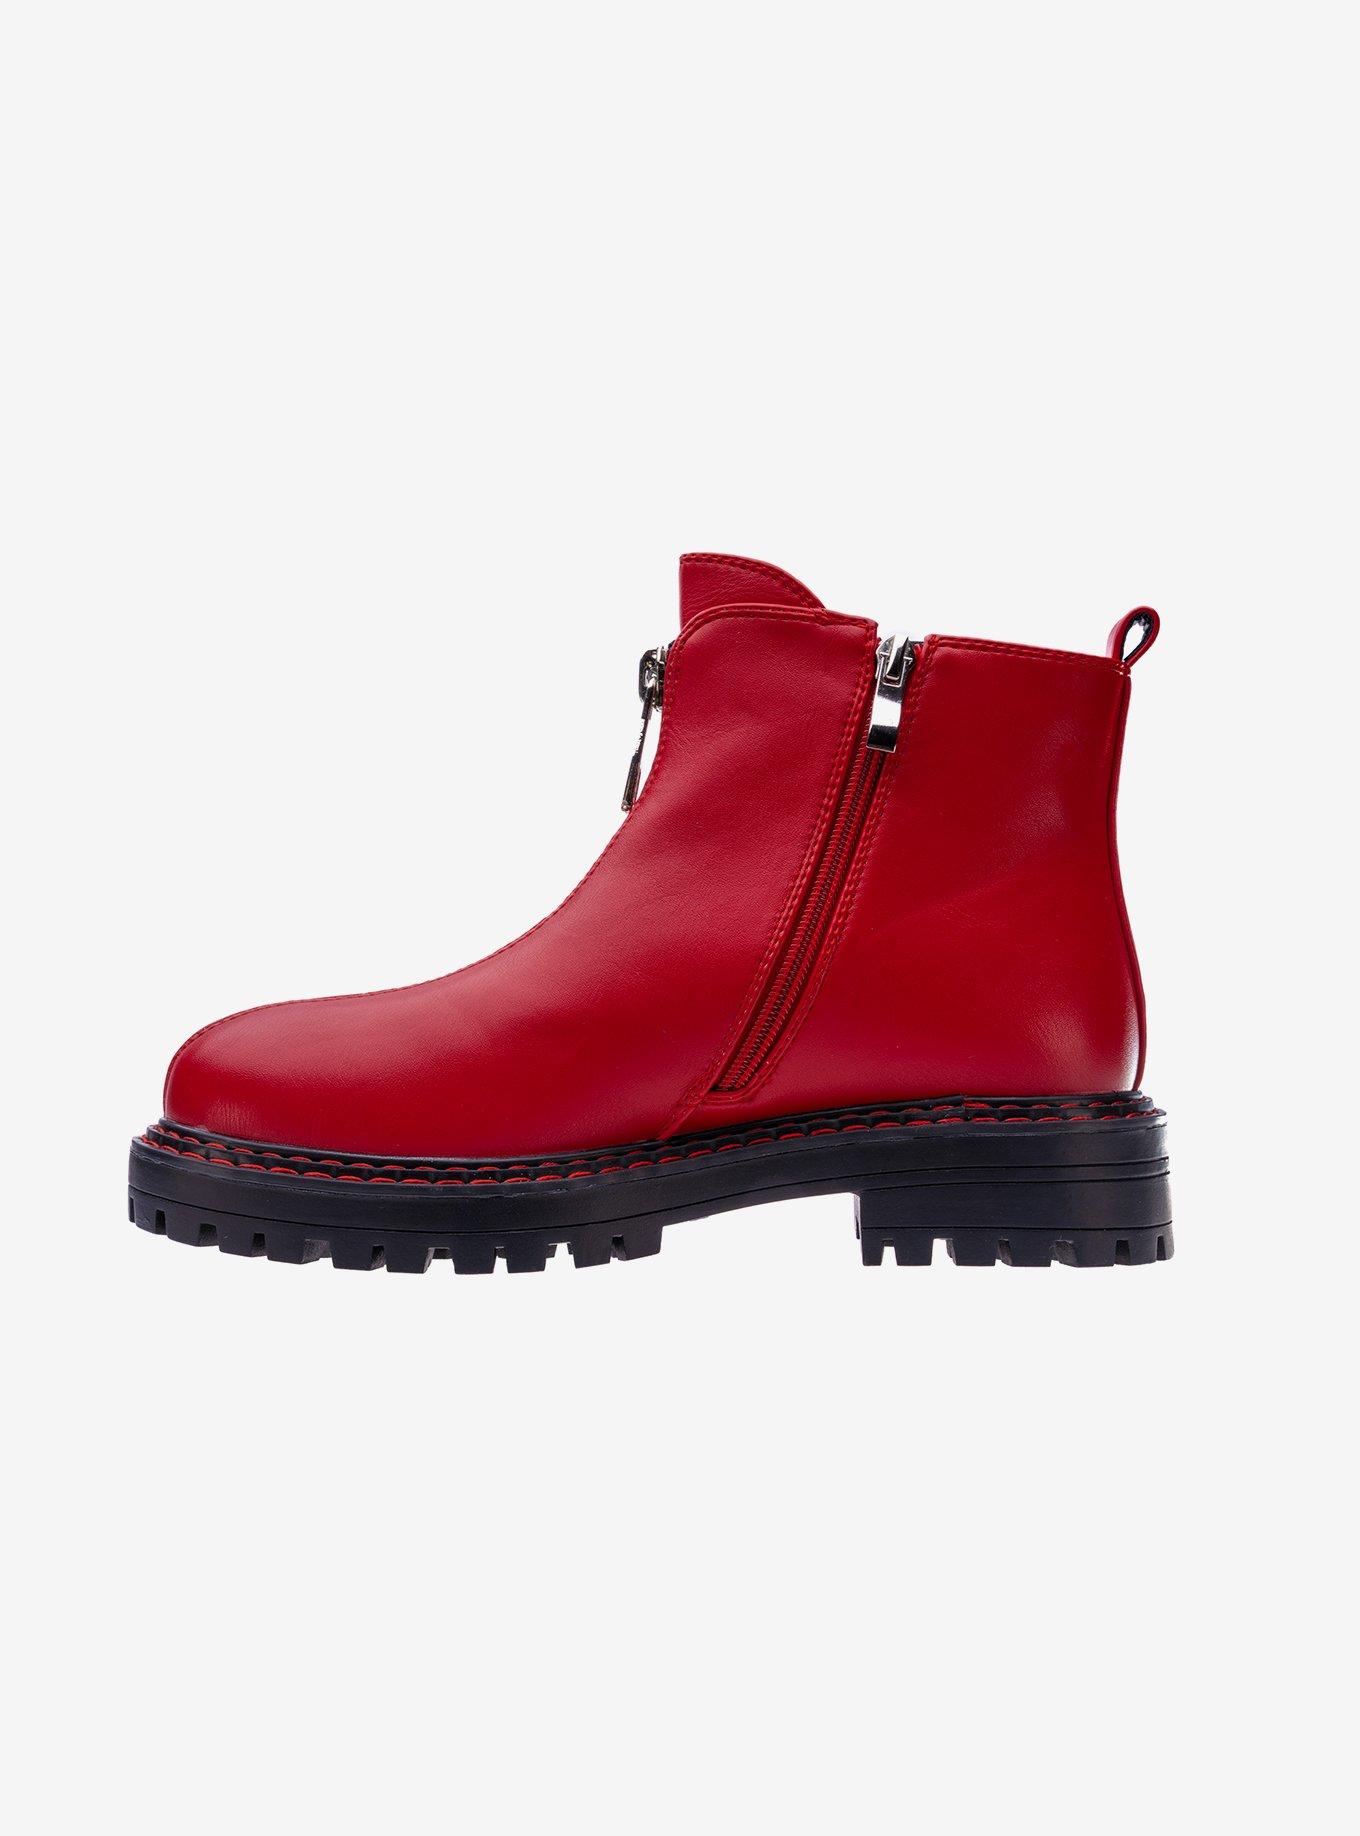 Rome Bootie Red, RED, alternate